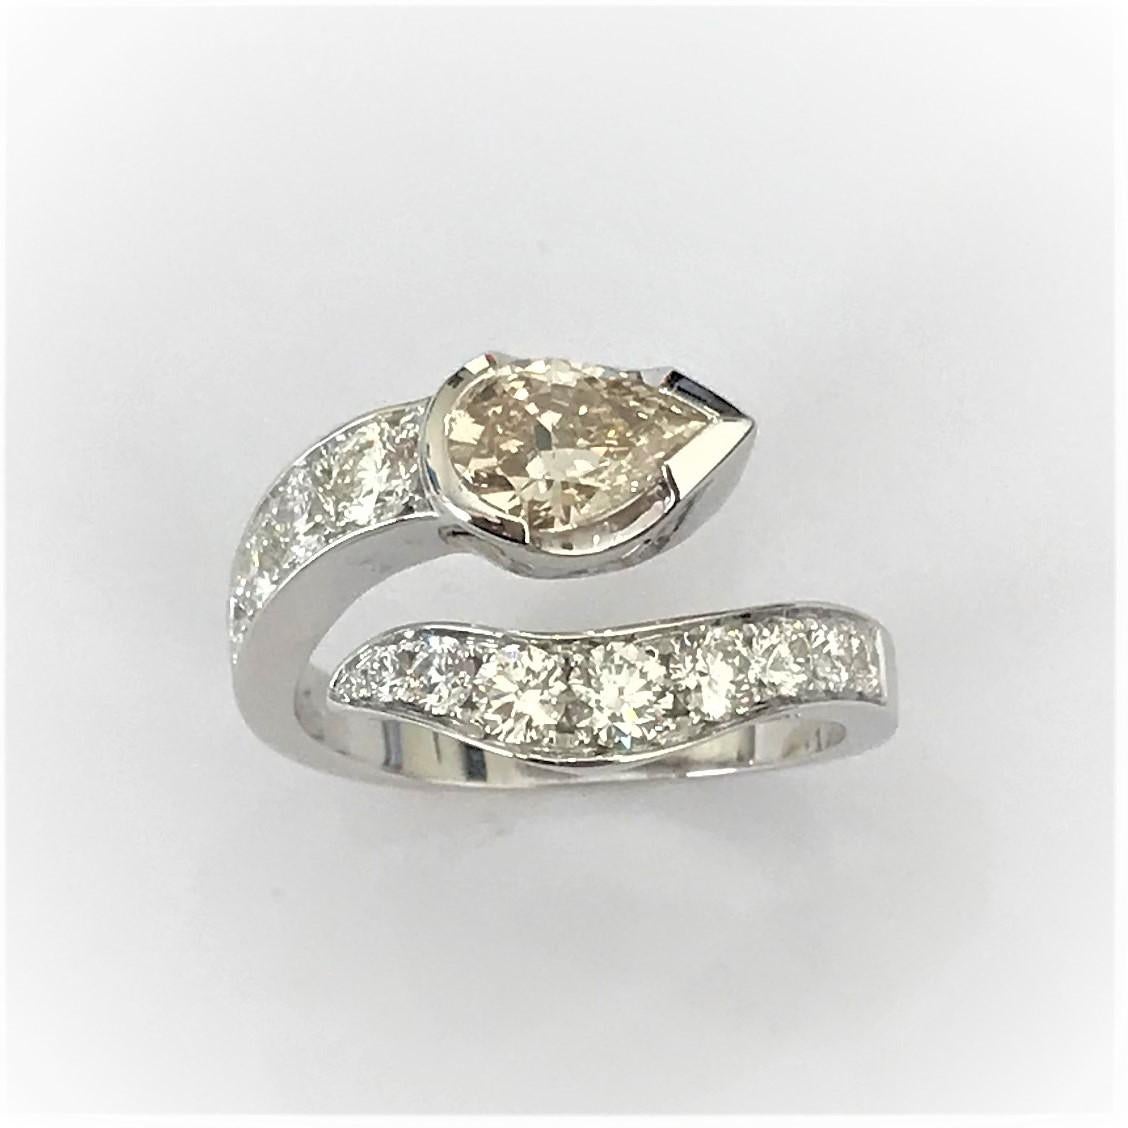 Snake-shaped ring set with a 0.90 carat brown pear diamond and 0.92 carat round brilliant cut diamonds cocktail ring.
The ring is 18 k white gold
Ring size 56